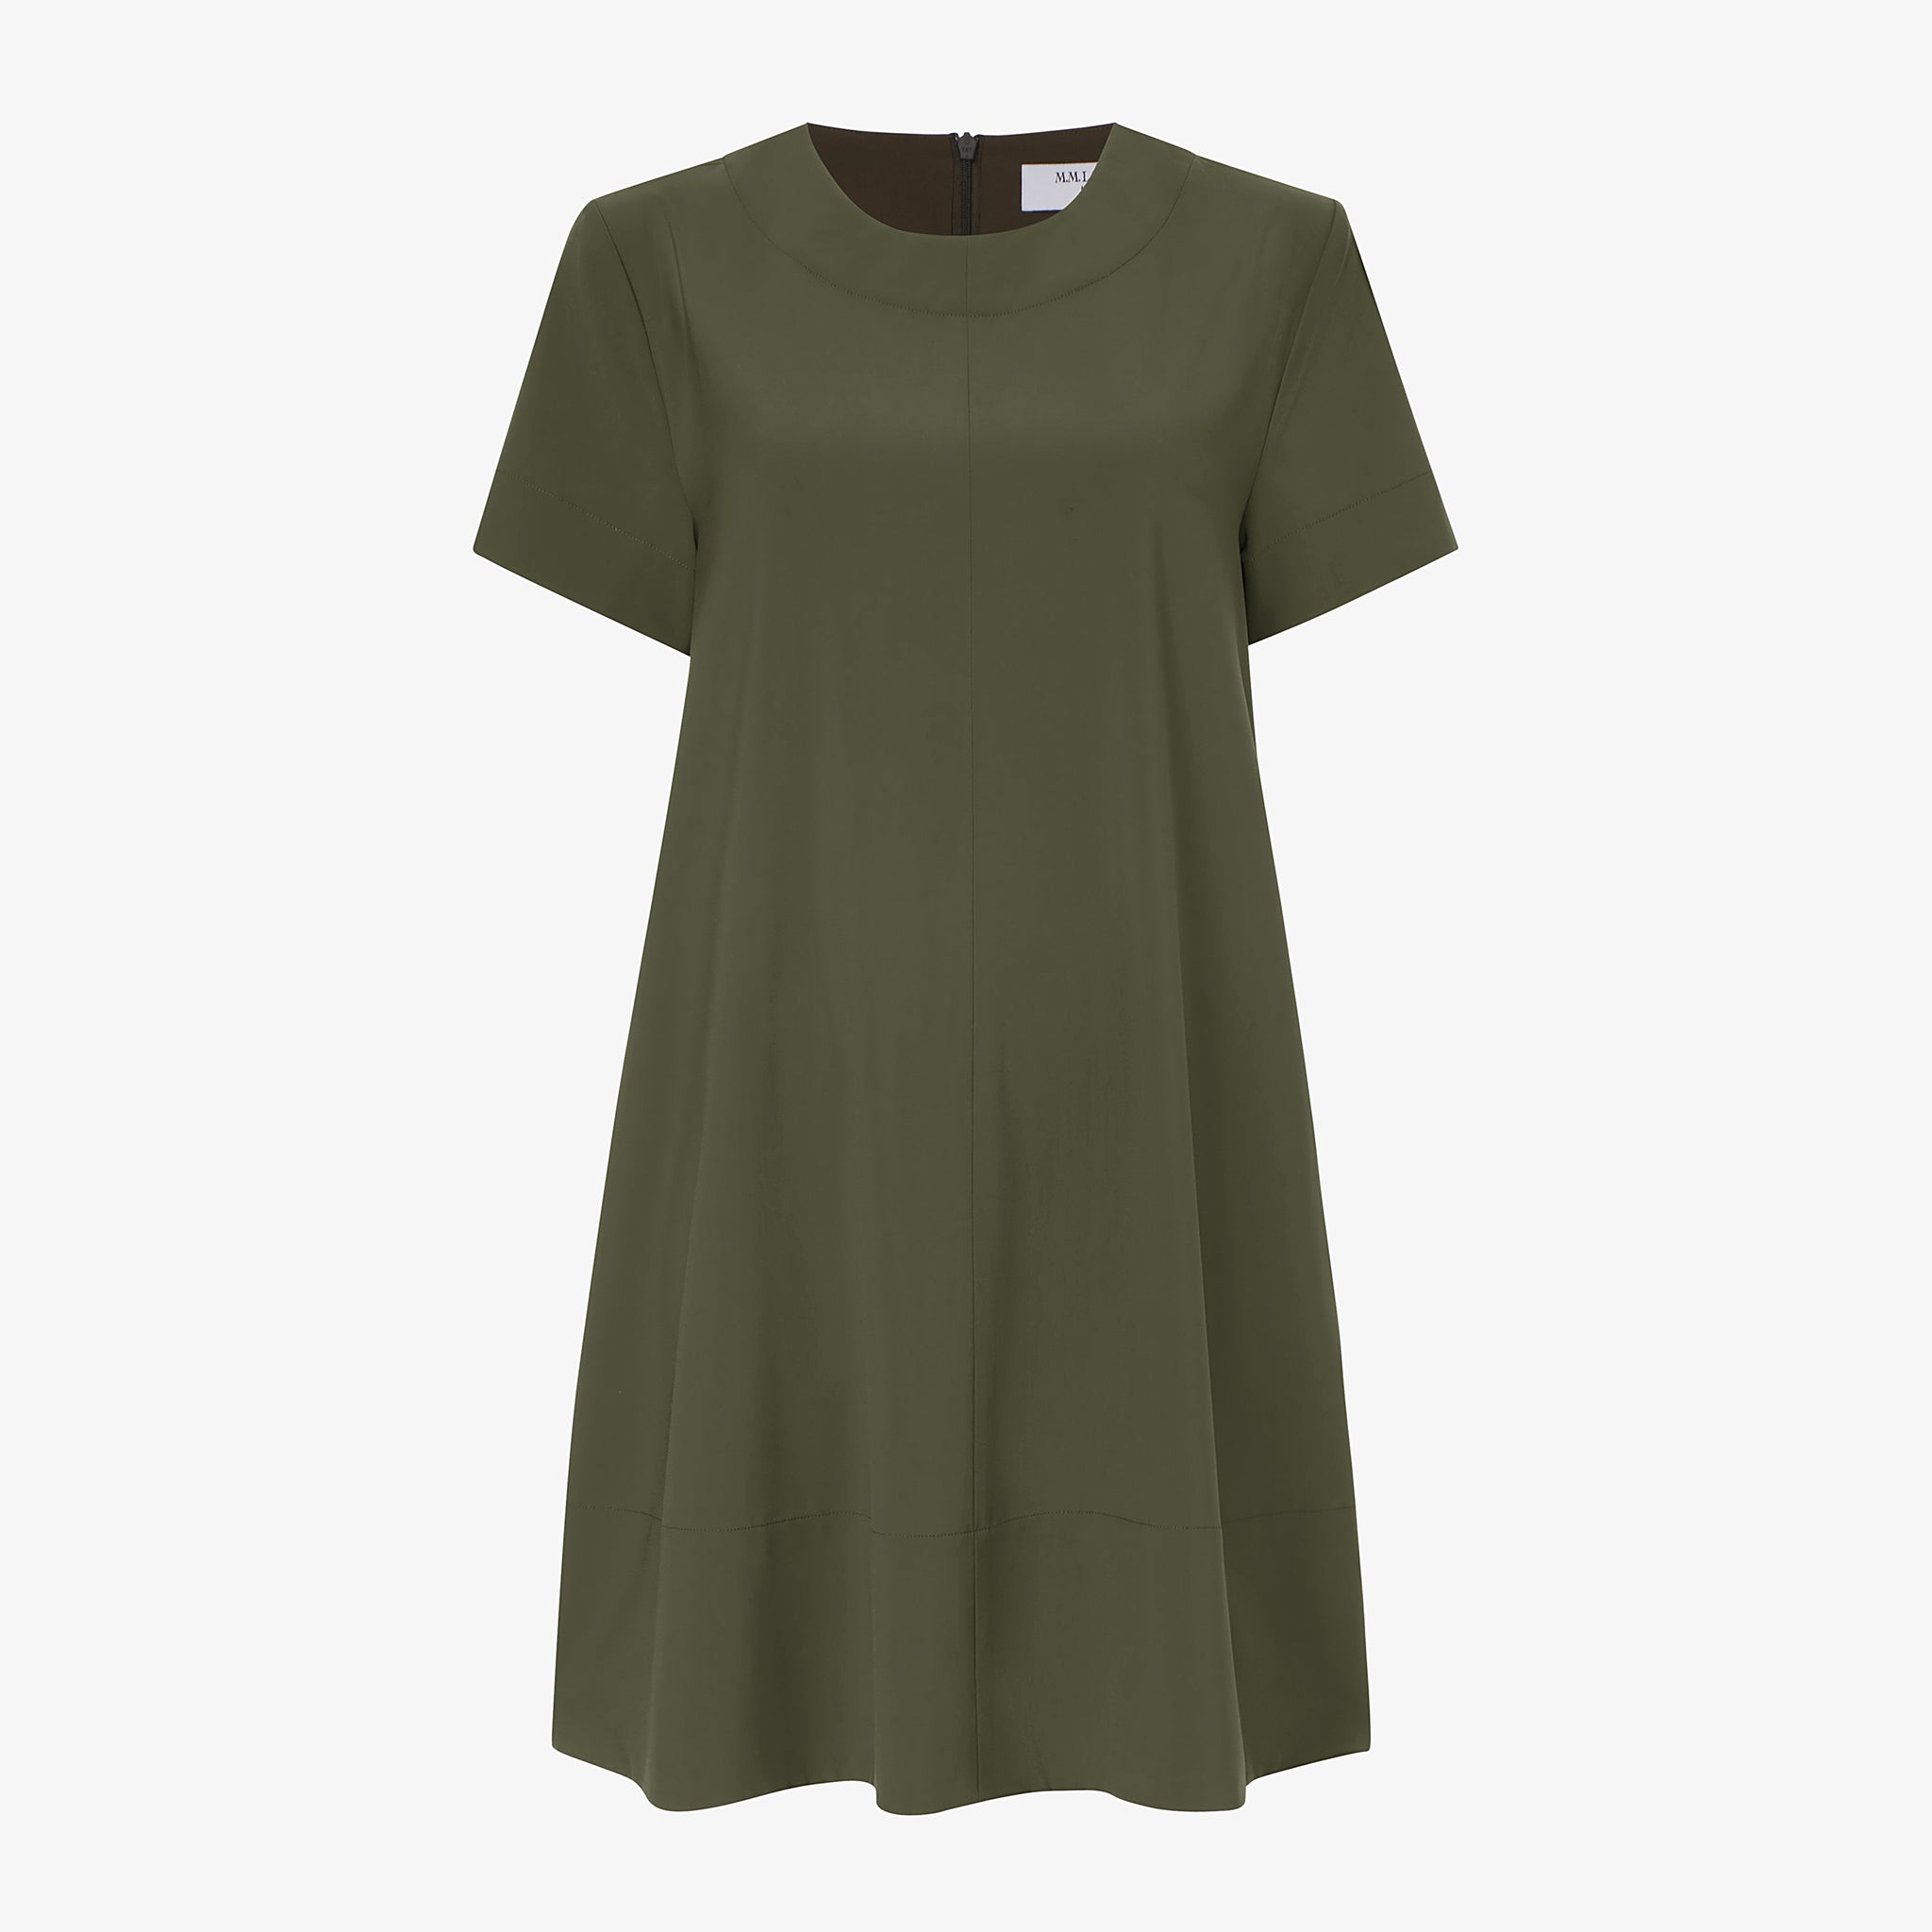 Packshot image of the Corrie Dress in Olive